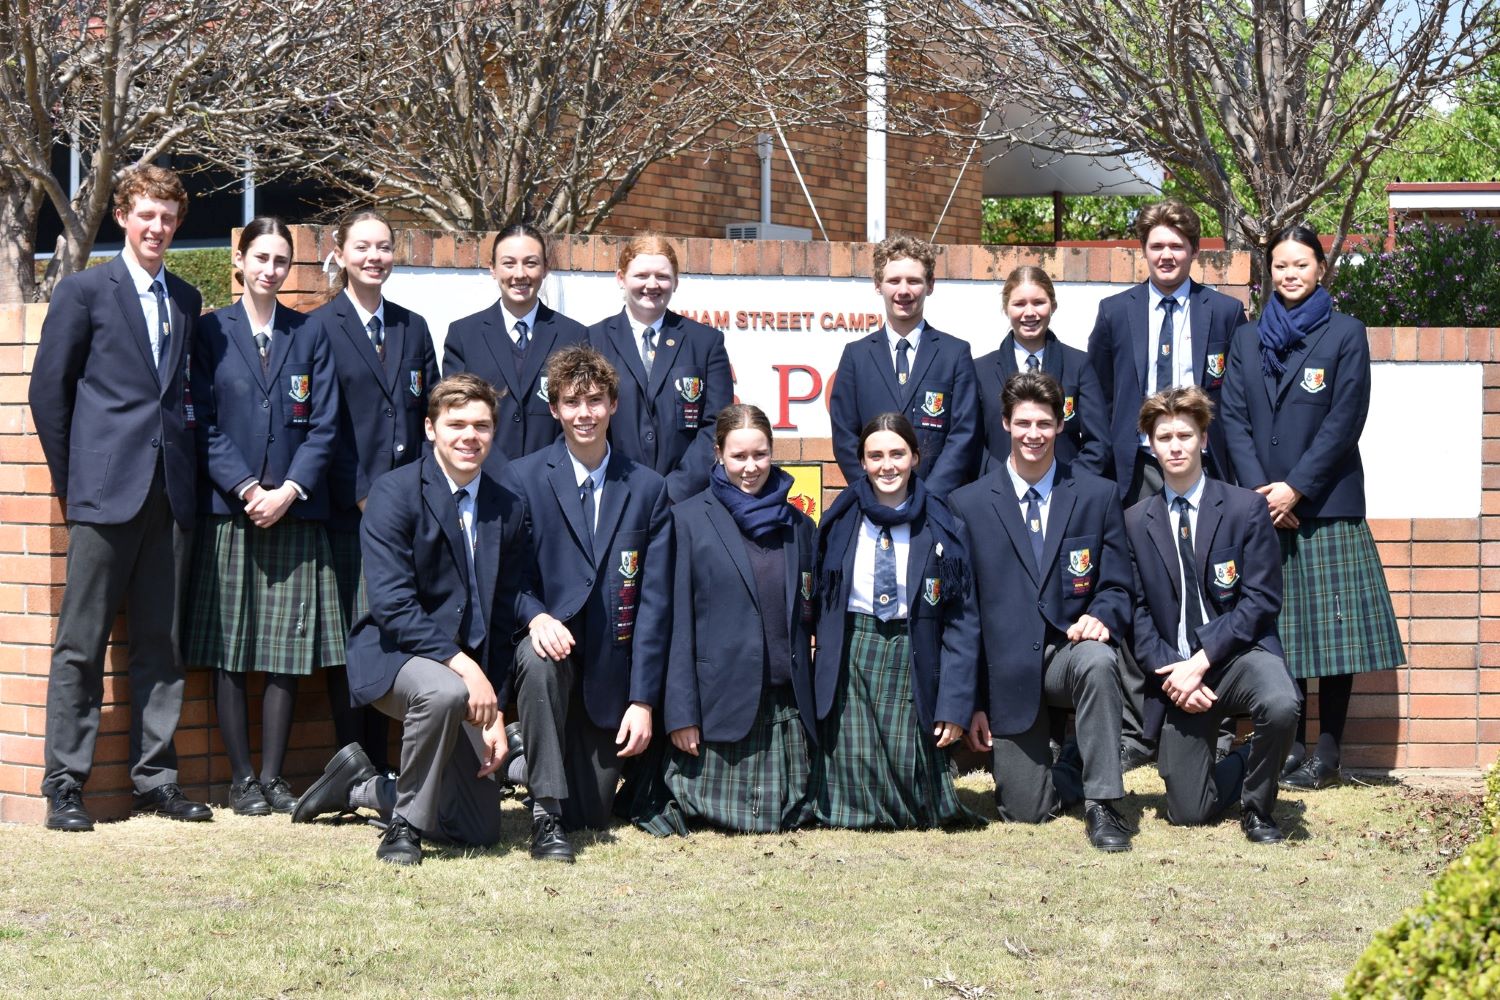 From the Senior School featured image